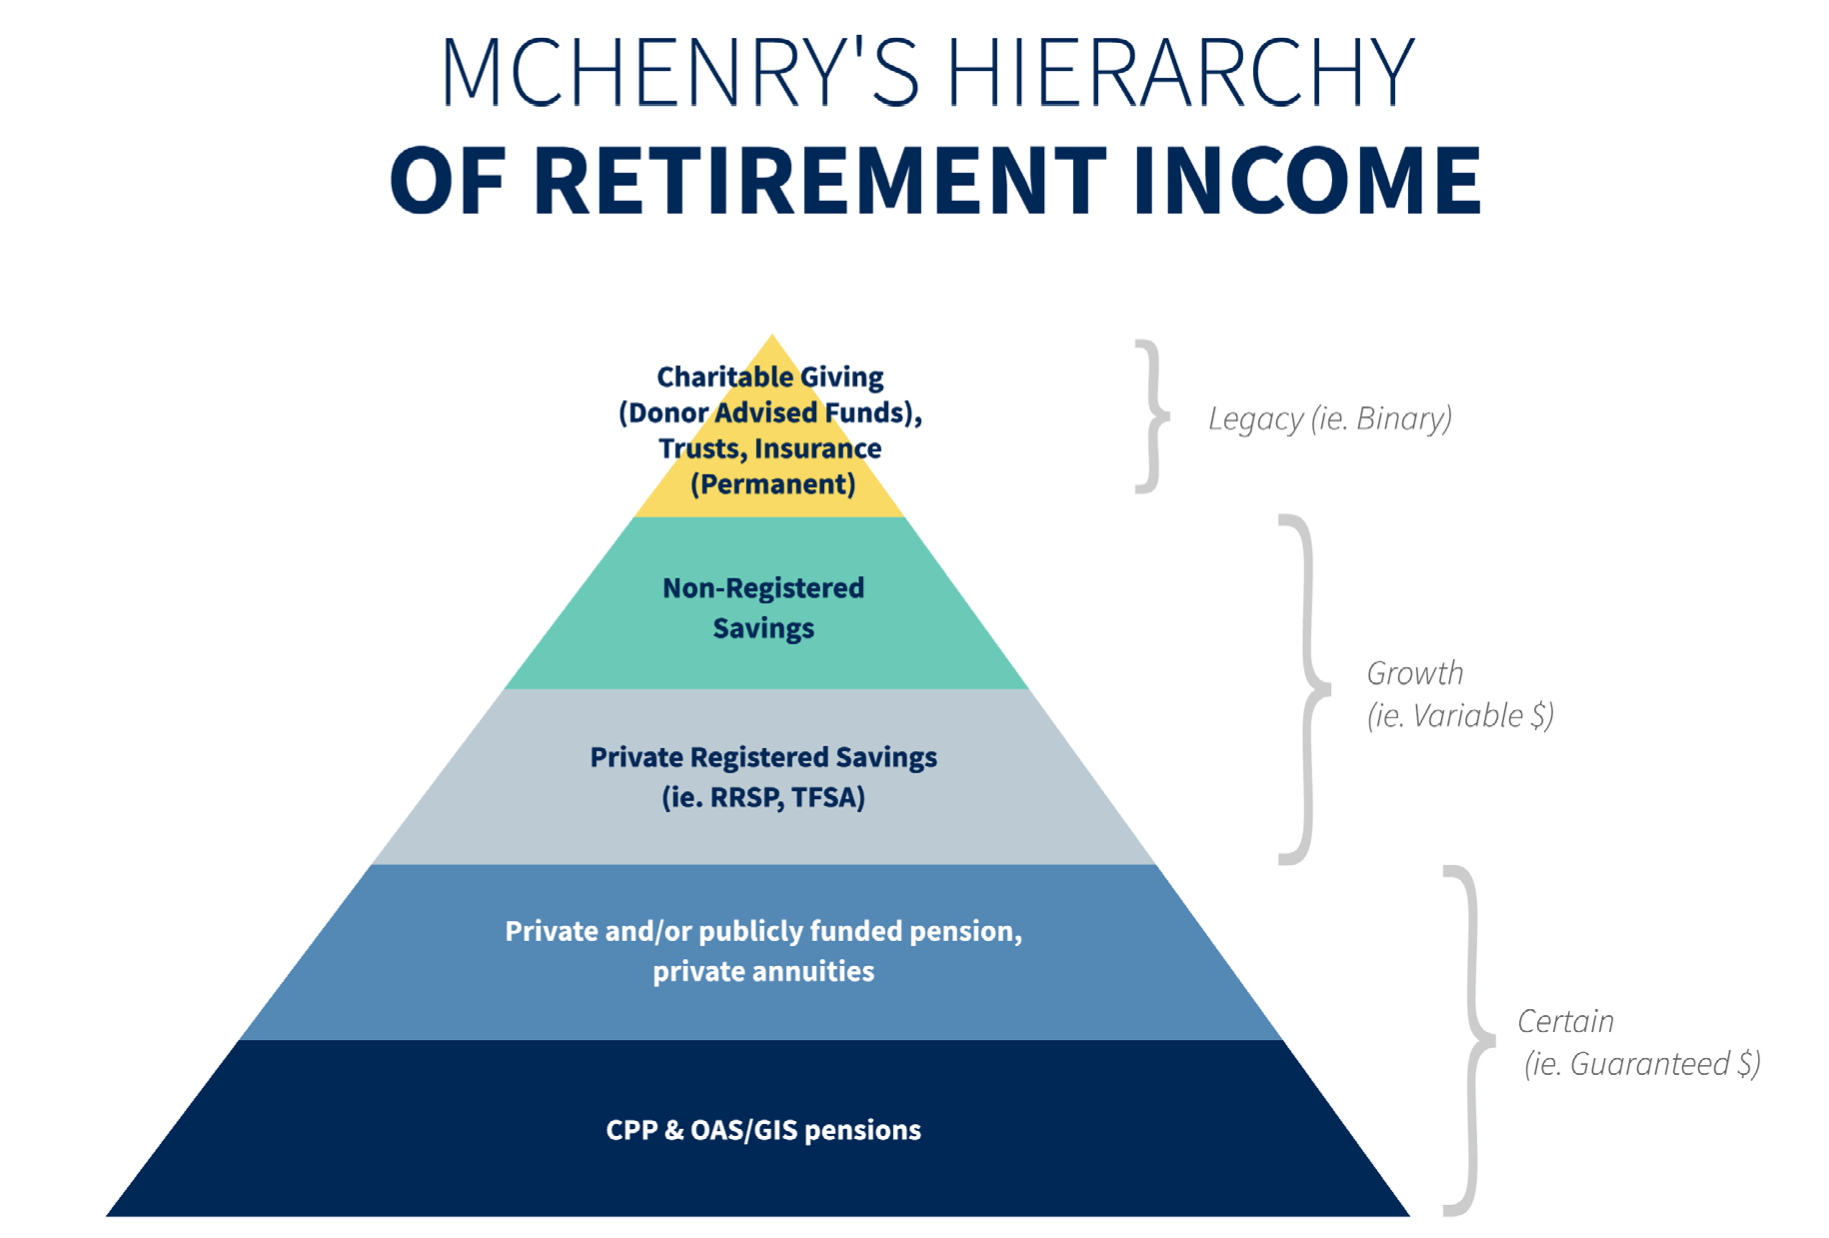 Hierarchy of Retirement Income